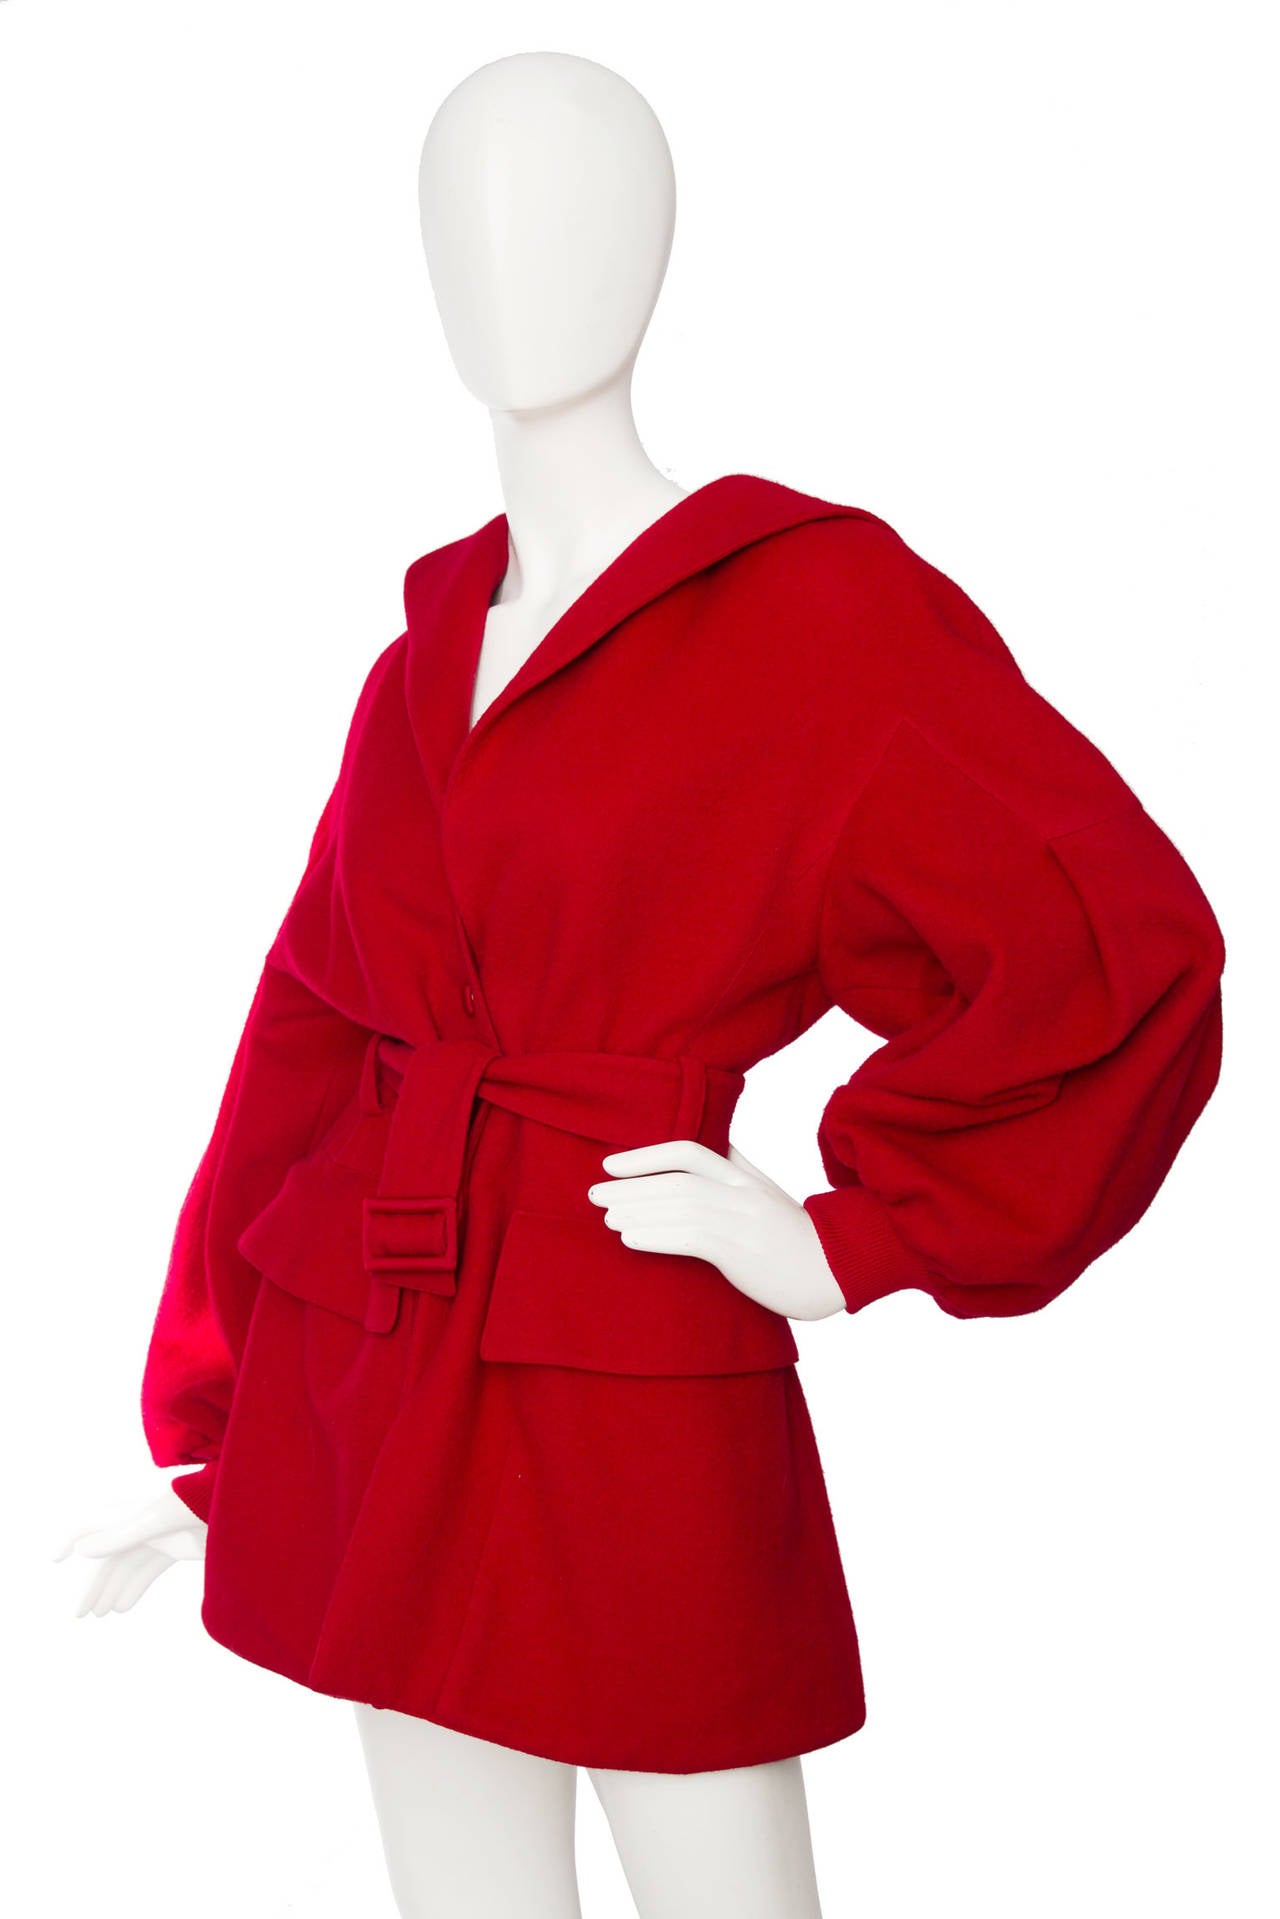 A stunning 1980s Claude Montana bright red hooded wool coat with voluminous sleeves with elasticated cuffs and rounded shoulders. On each side of the hip the coat has two square flap patch pockets. The coat is fully lined and closes in the front